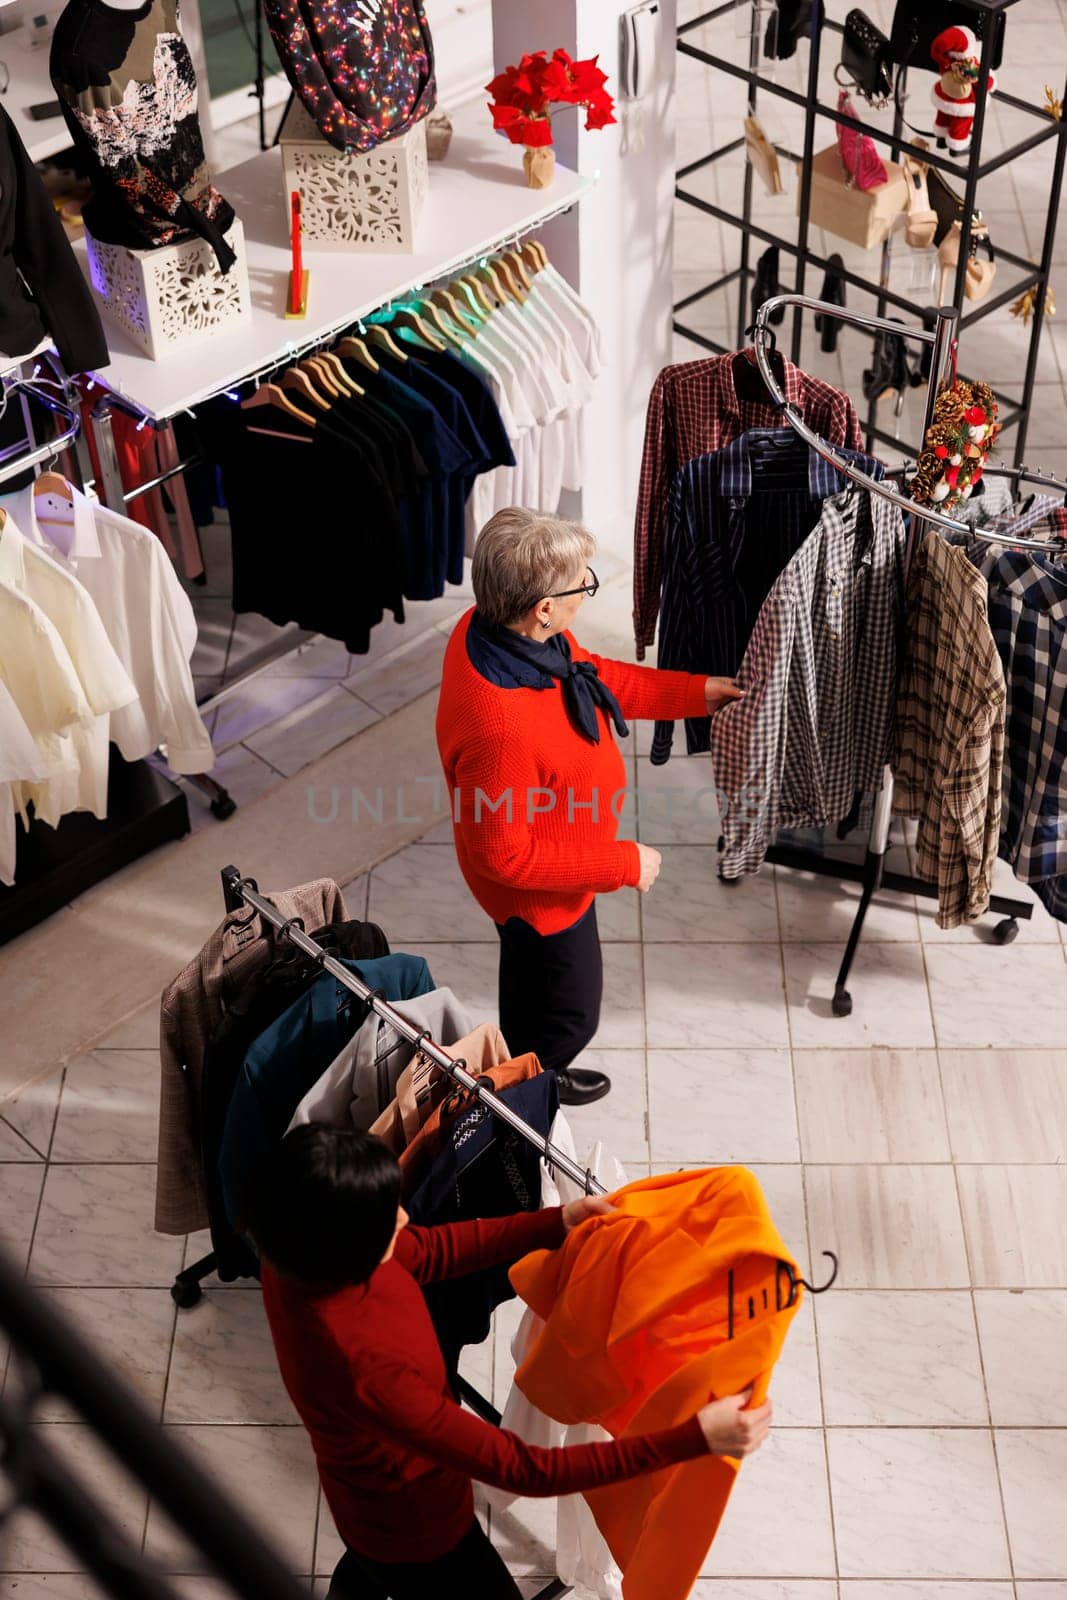 Multiple clients looking for xmas gifts and festive attire, people making preparations for christmas eve festivities and tradition. Retail store customers shopping for clothes during december season.